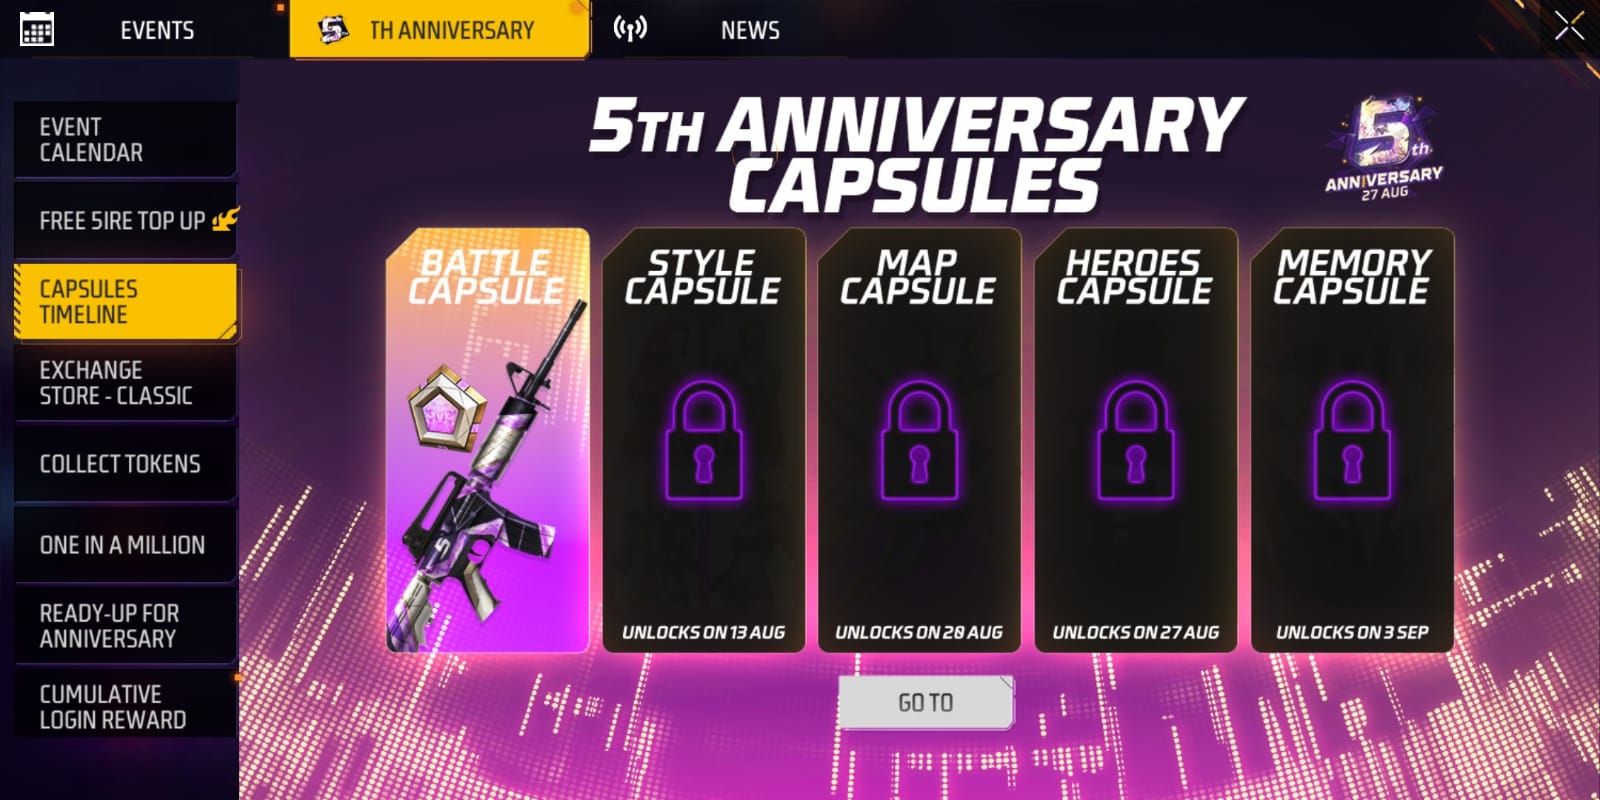 Free Fire MAX Fifth Anniversary: Mega celebrations start in-game with loads of rewards up for grabs, all you need to know about the event and its rewards.